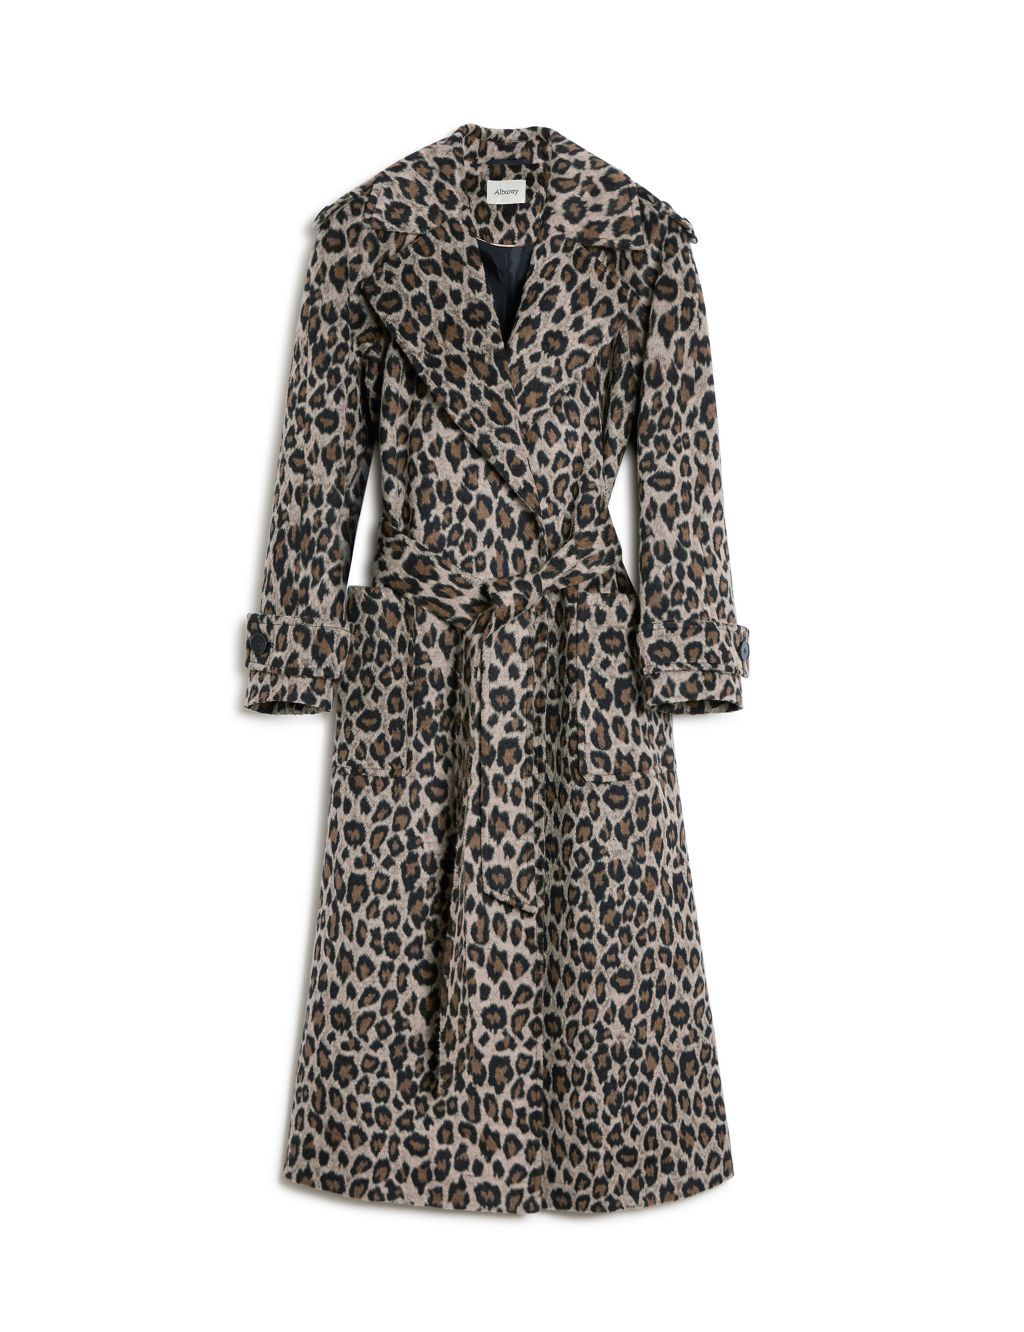 Leopard Print Belted Trench Coat with Wool image 2